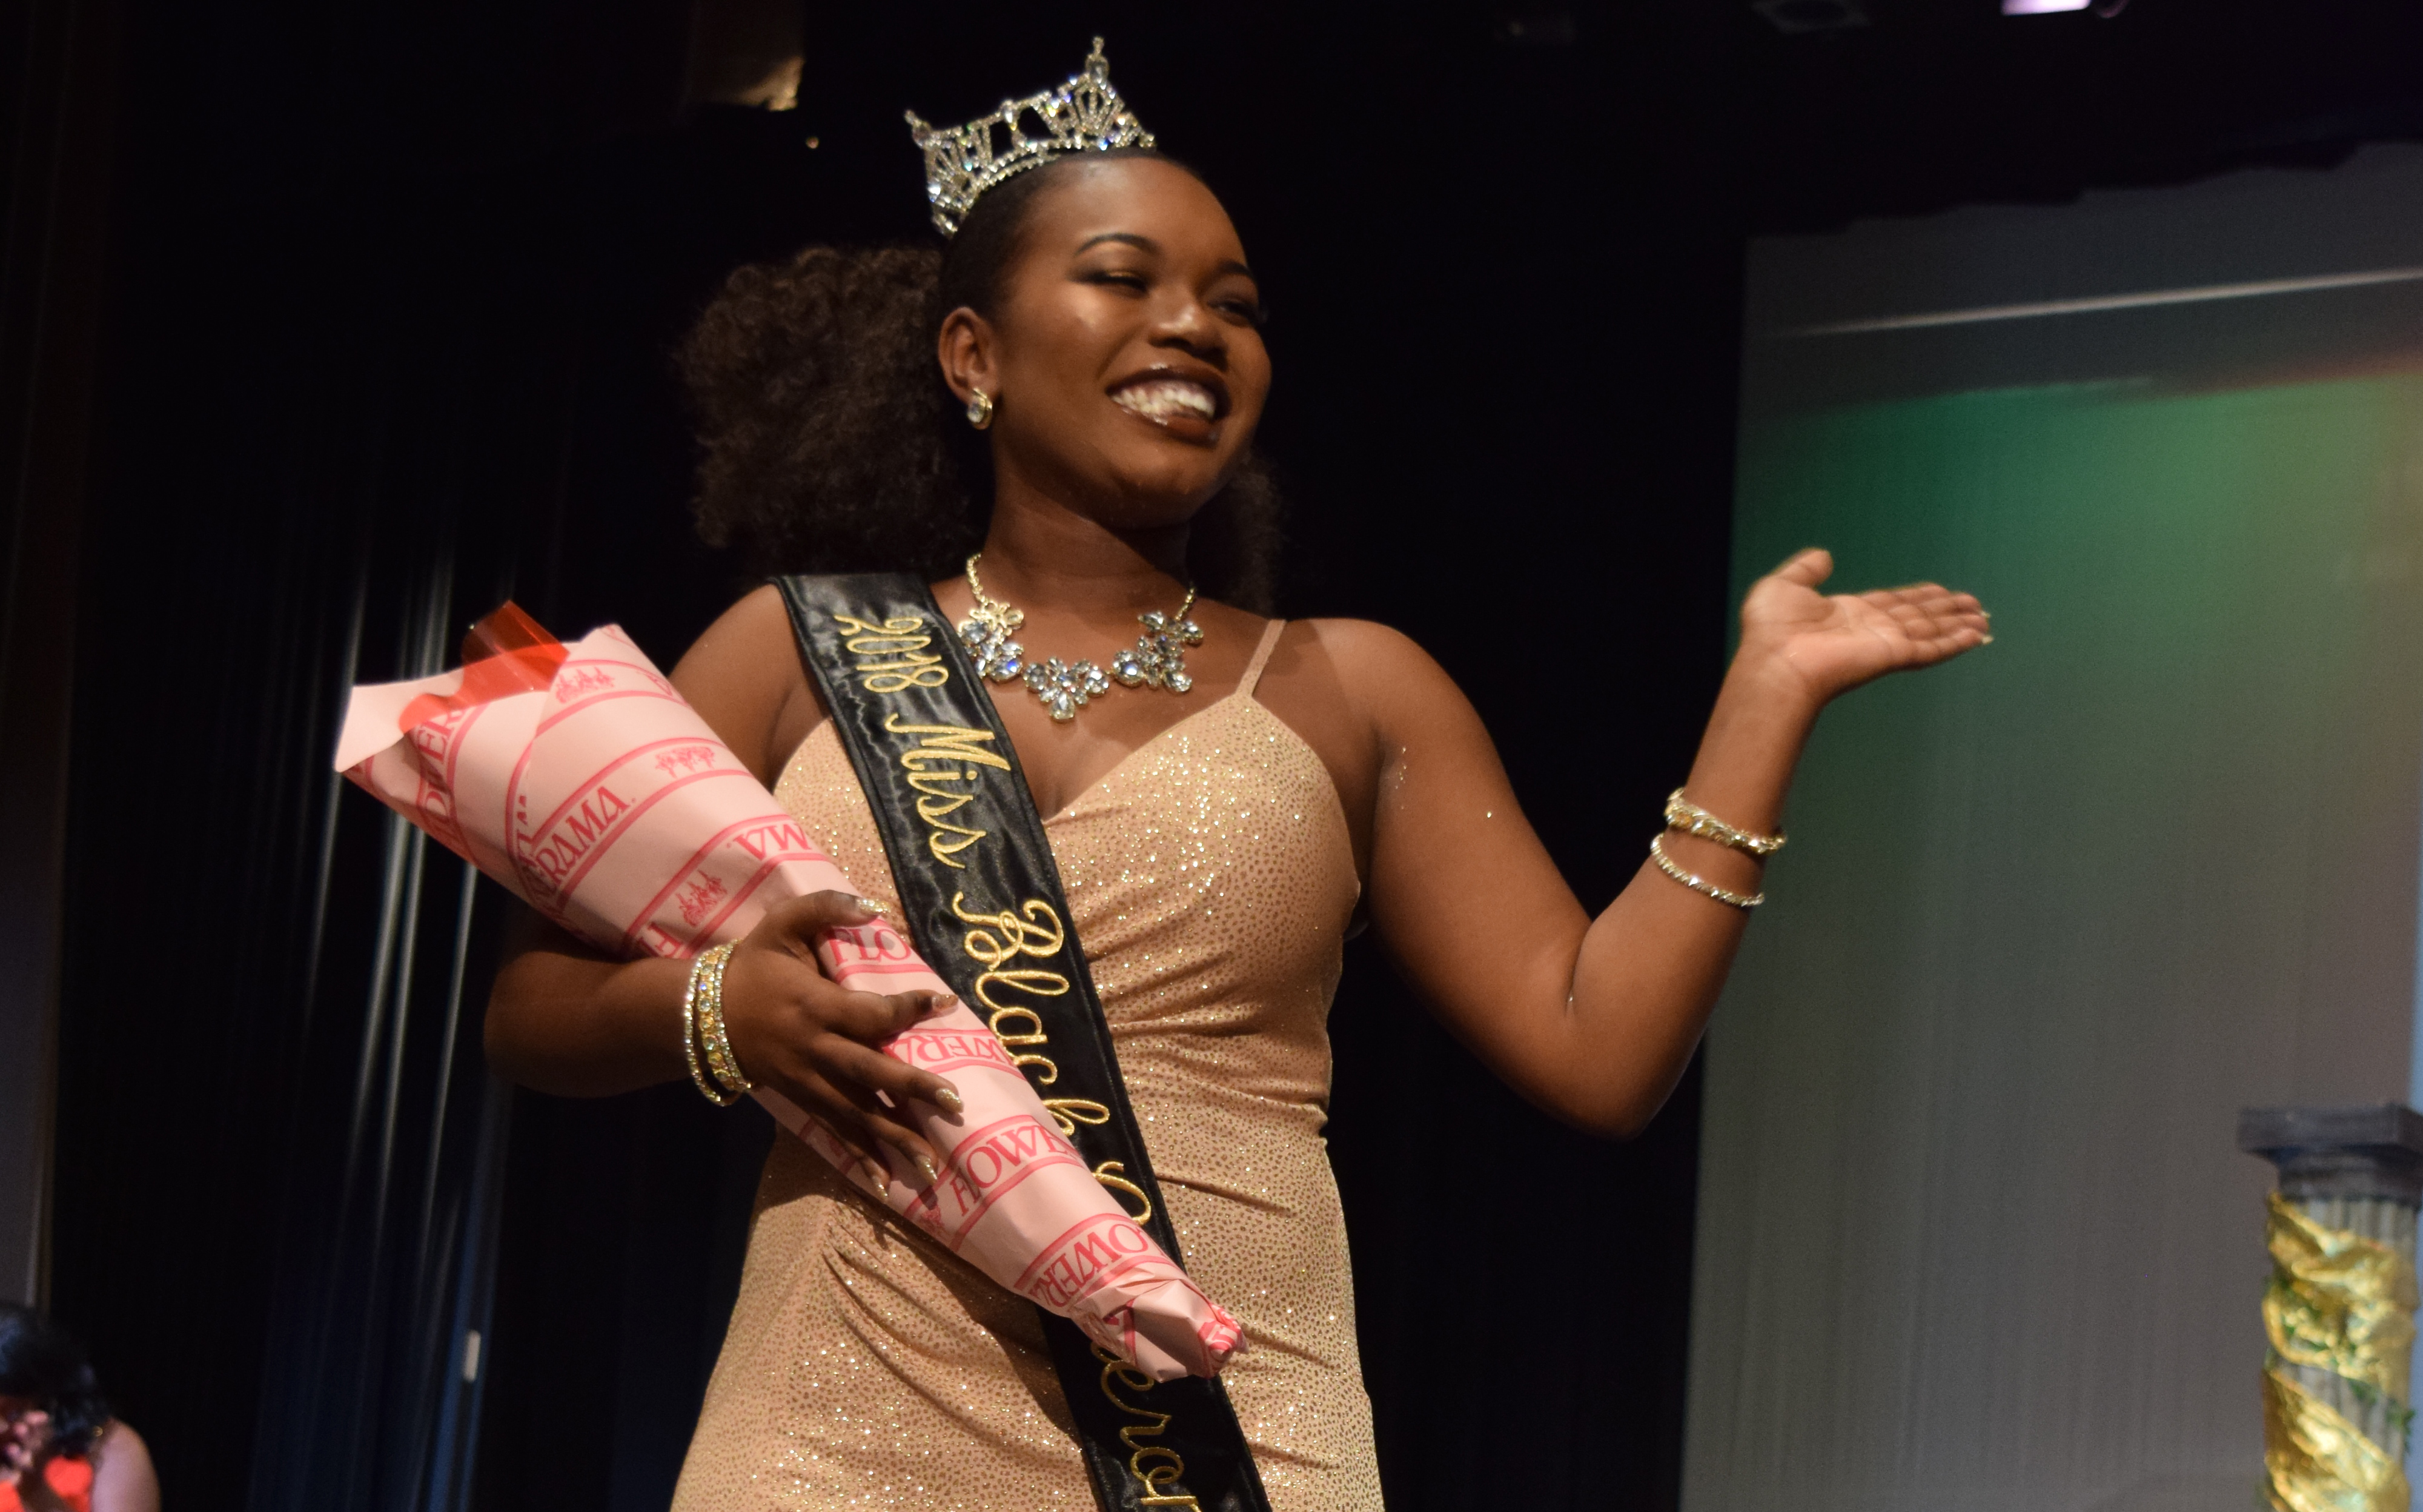 Competing for 2018 Miss Black CU